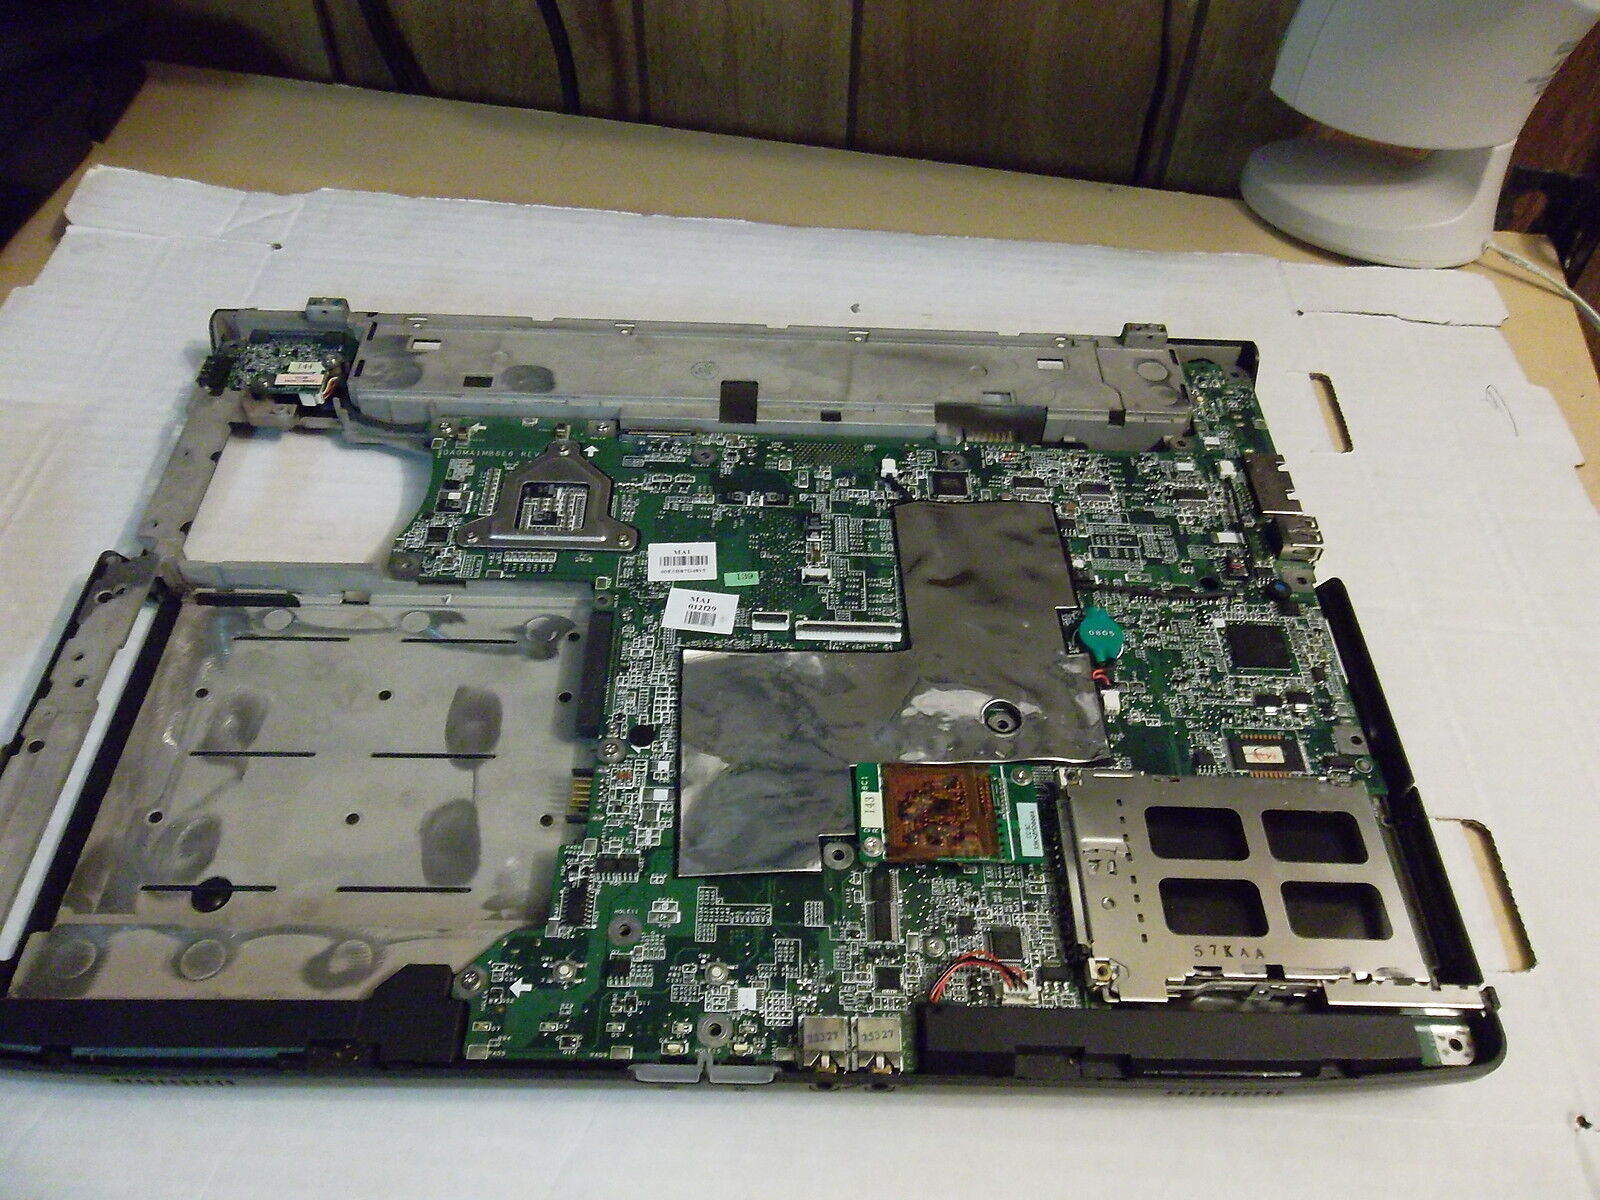 Used Pent m 1.7 cpu/mainboard in lower case from gateway m460/MA1 laptop. Look.